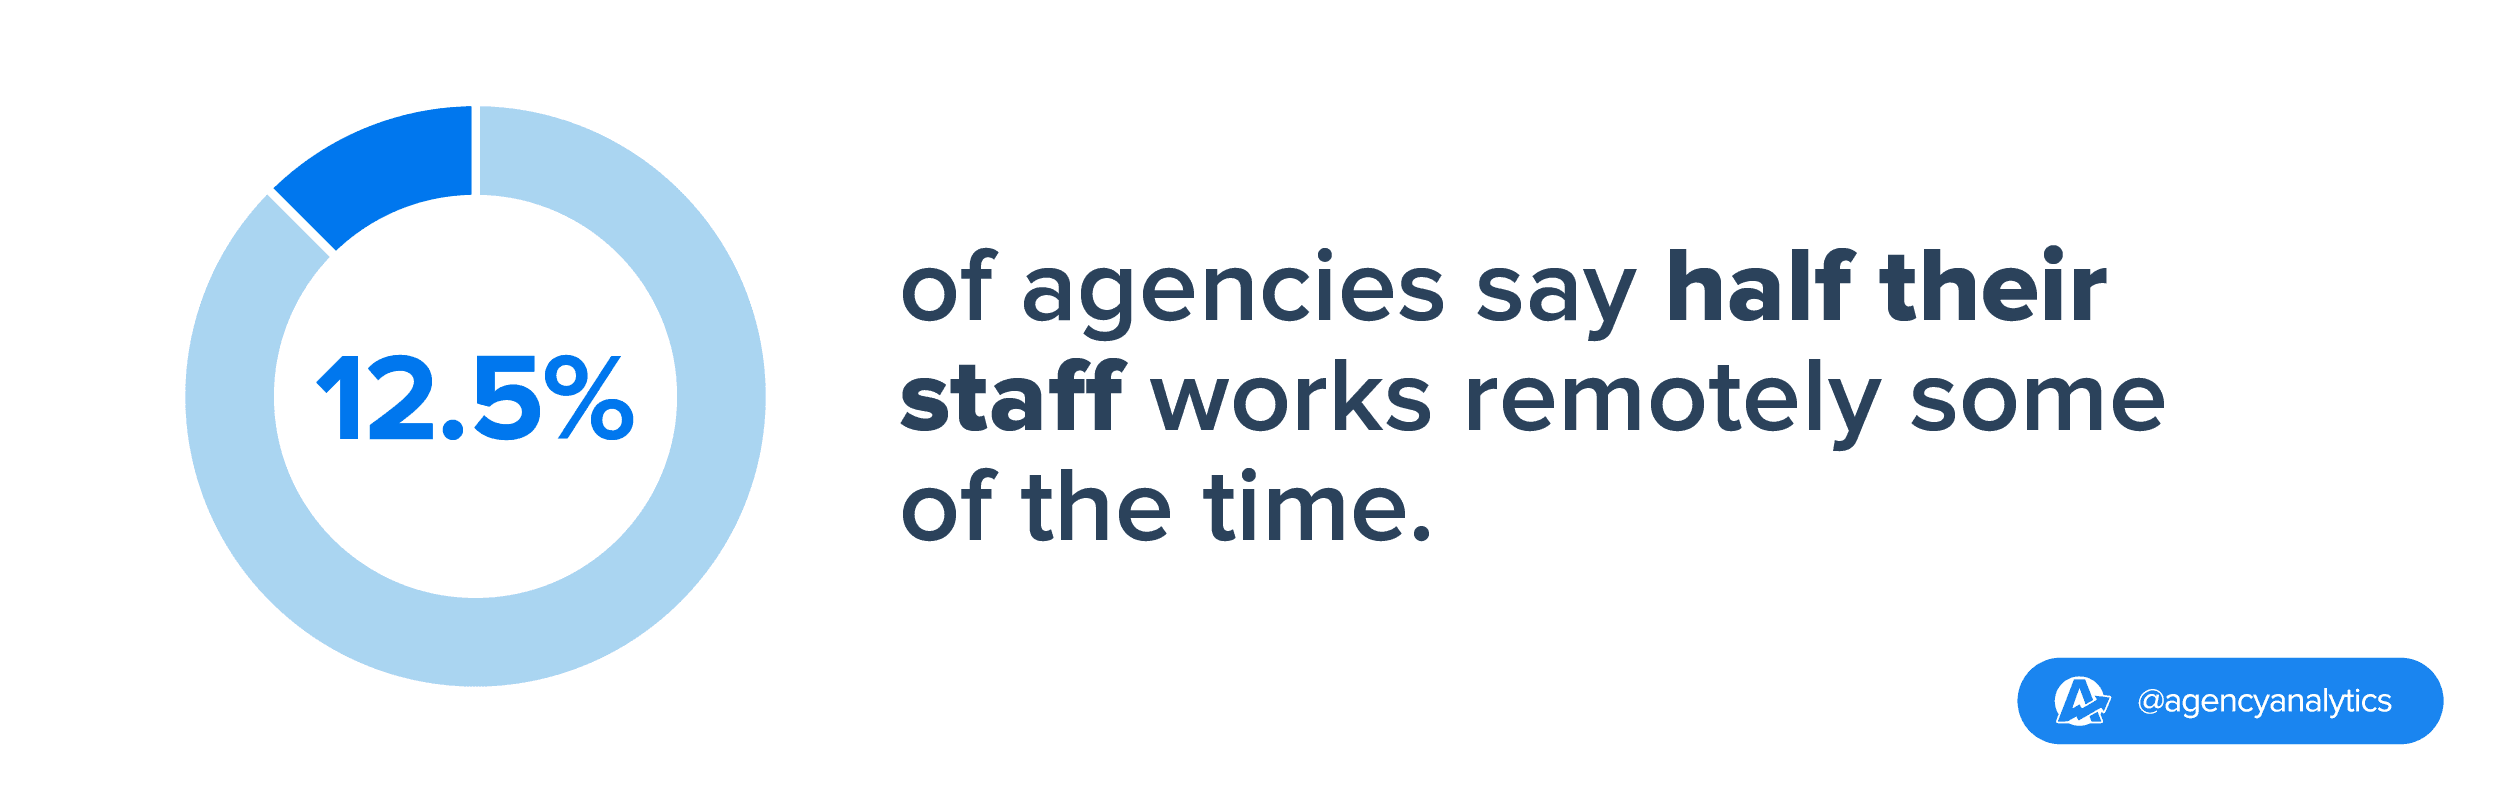 stat showing remote work habits in marketing agencies